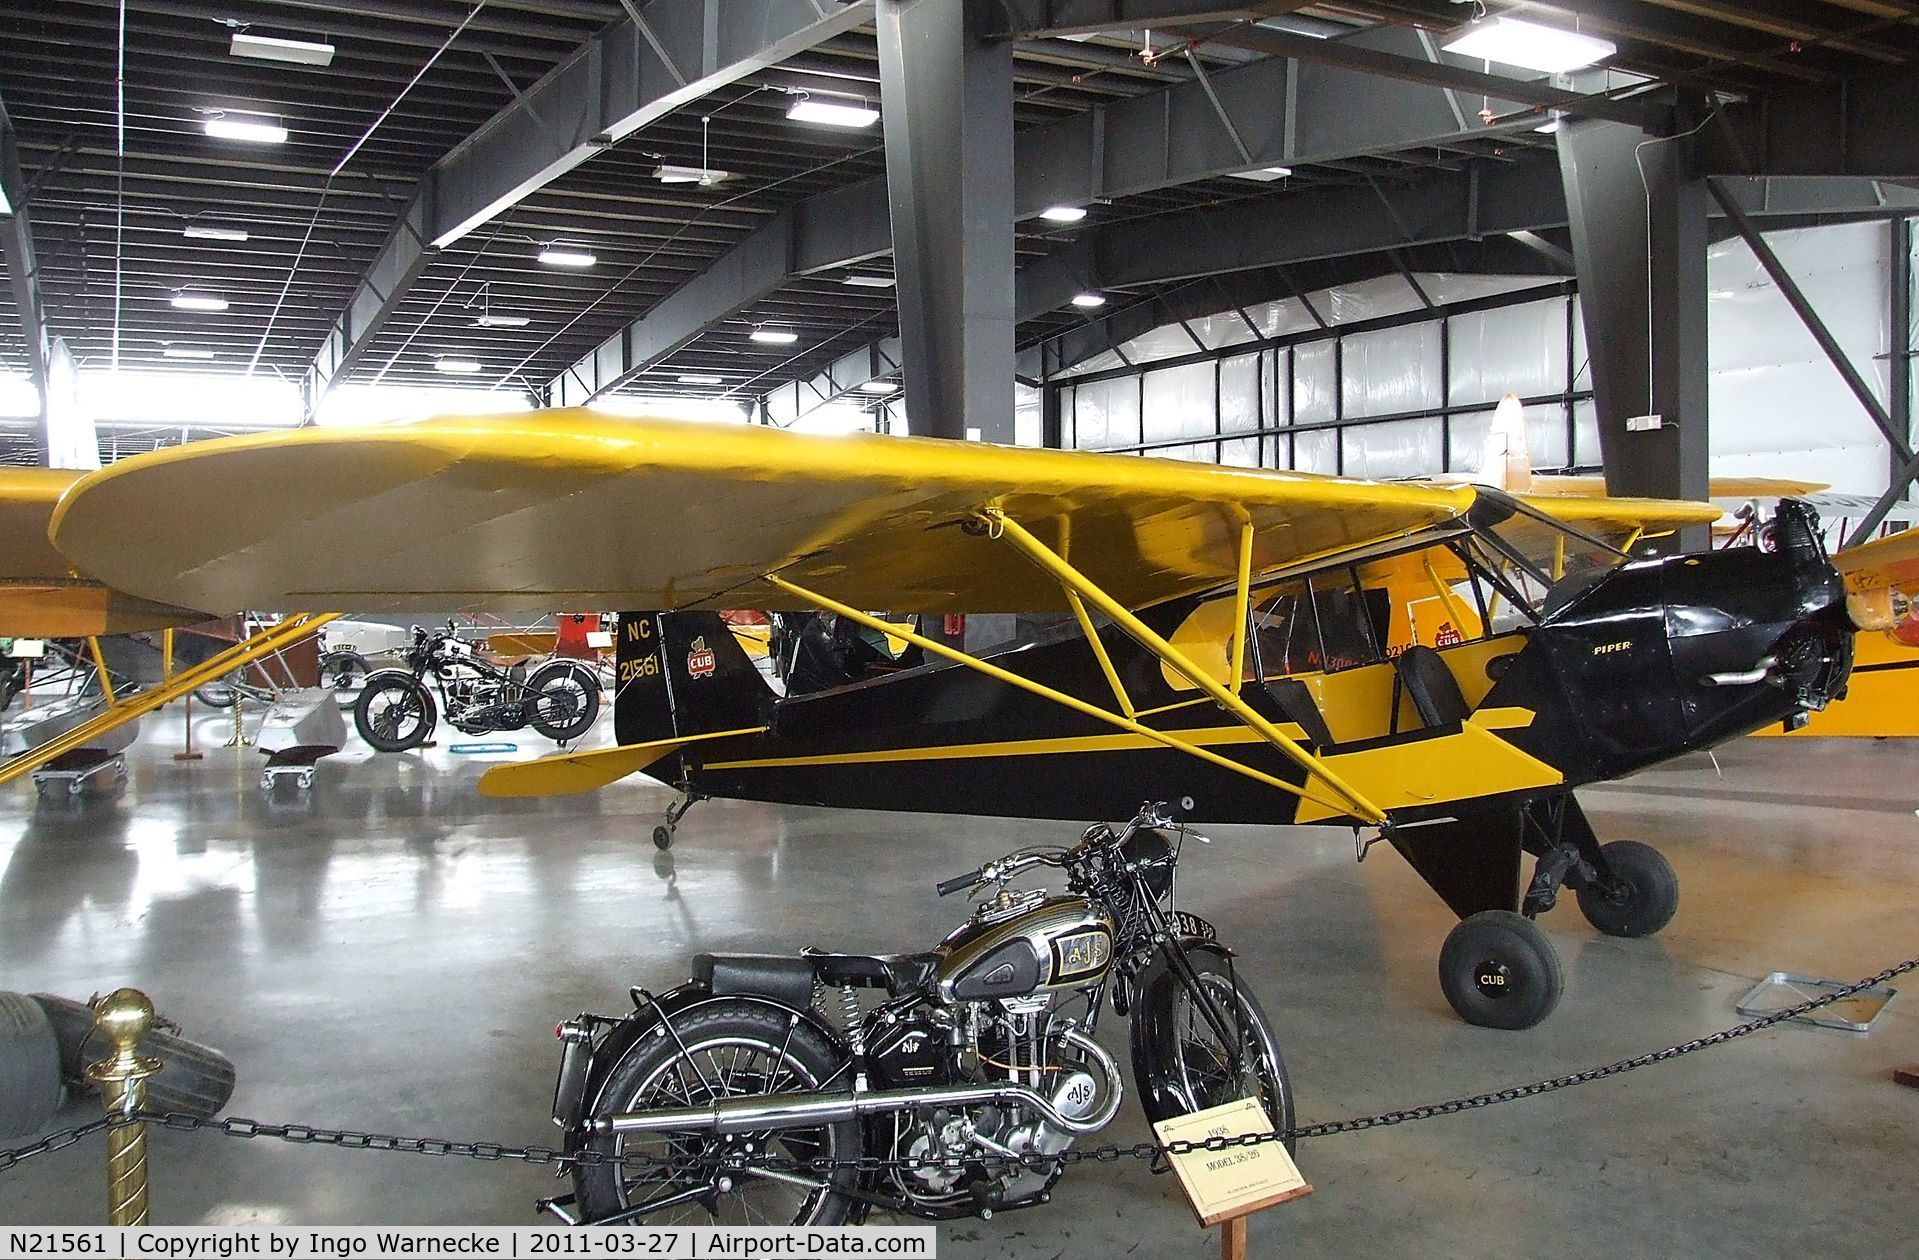 N21561, 1938 Piper J3P C/N 2474, Piper J3P Cub at the Western Antique Aeroplane and Automobile Museum, Hood River OR